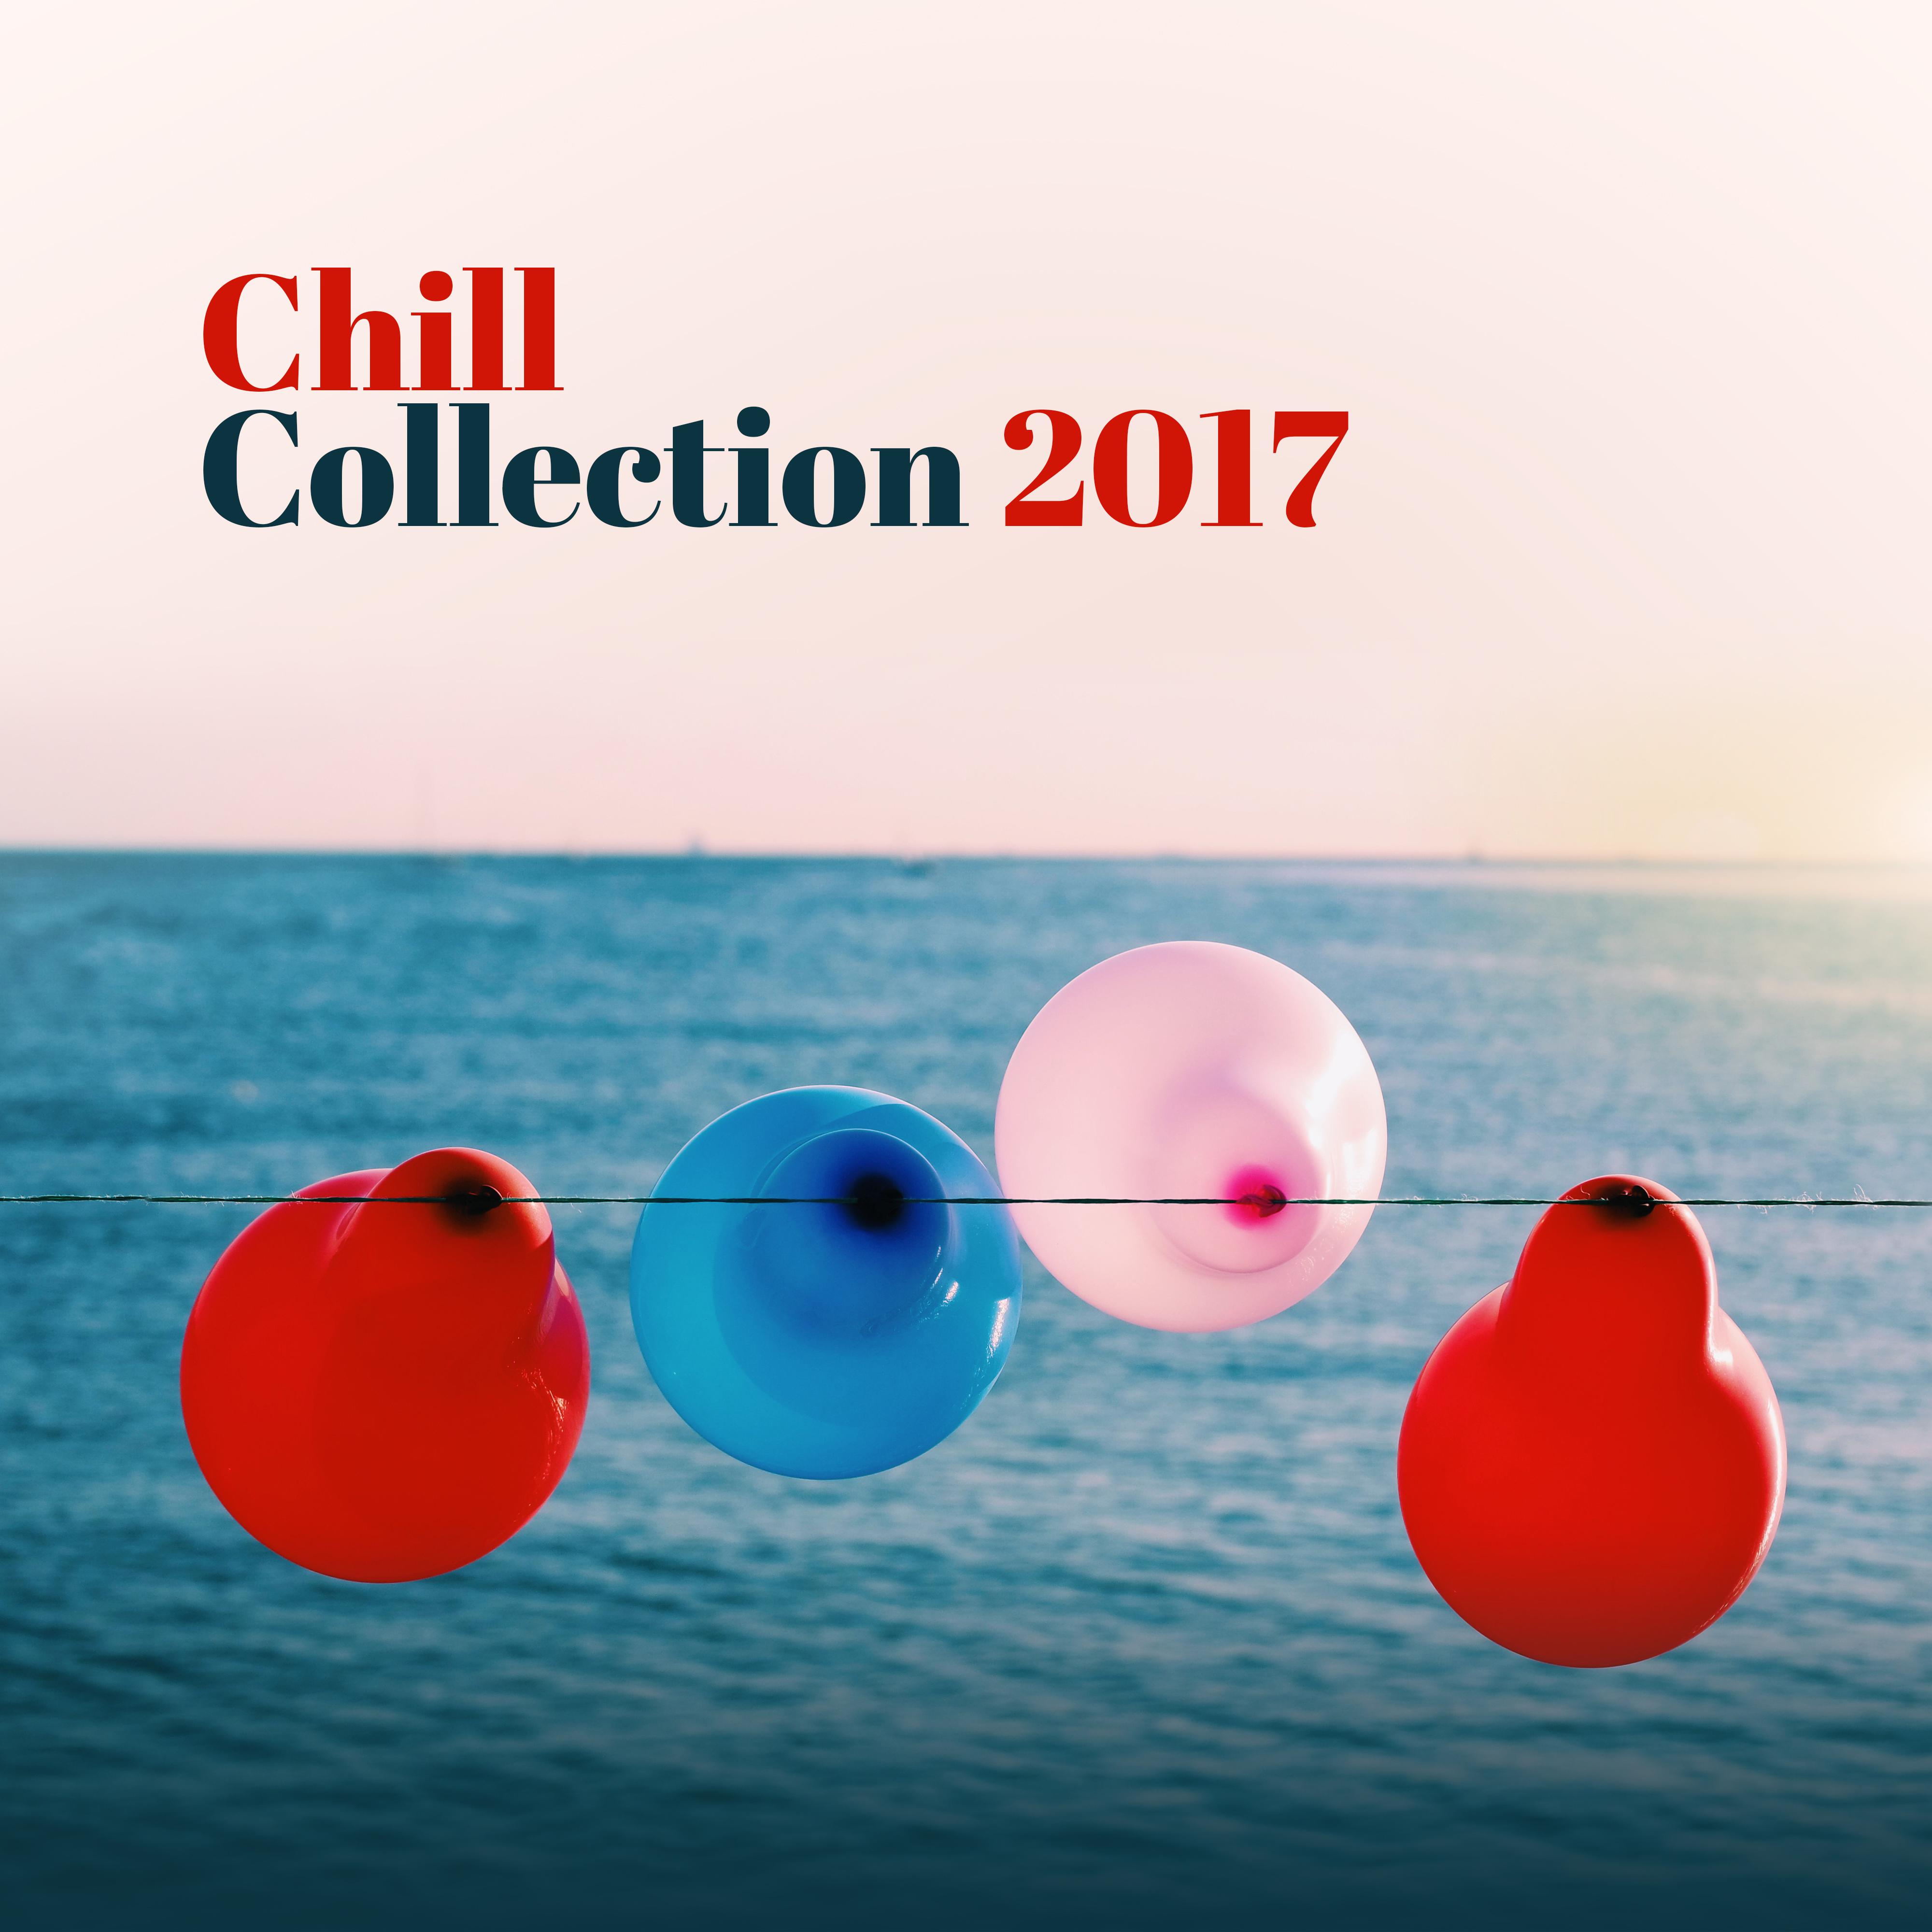 Chill Collection 2017 – Relaxing Music, Lounge Summer, Stress Relief, Ambient Chill Out, Cafe Chillout, Summer Chill